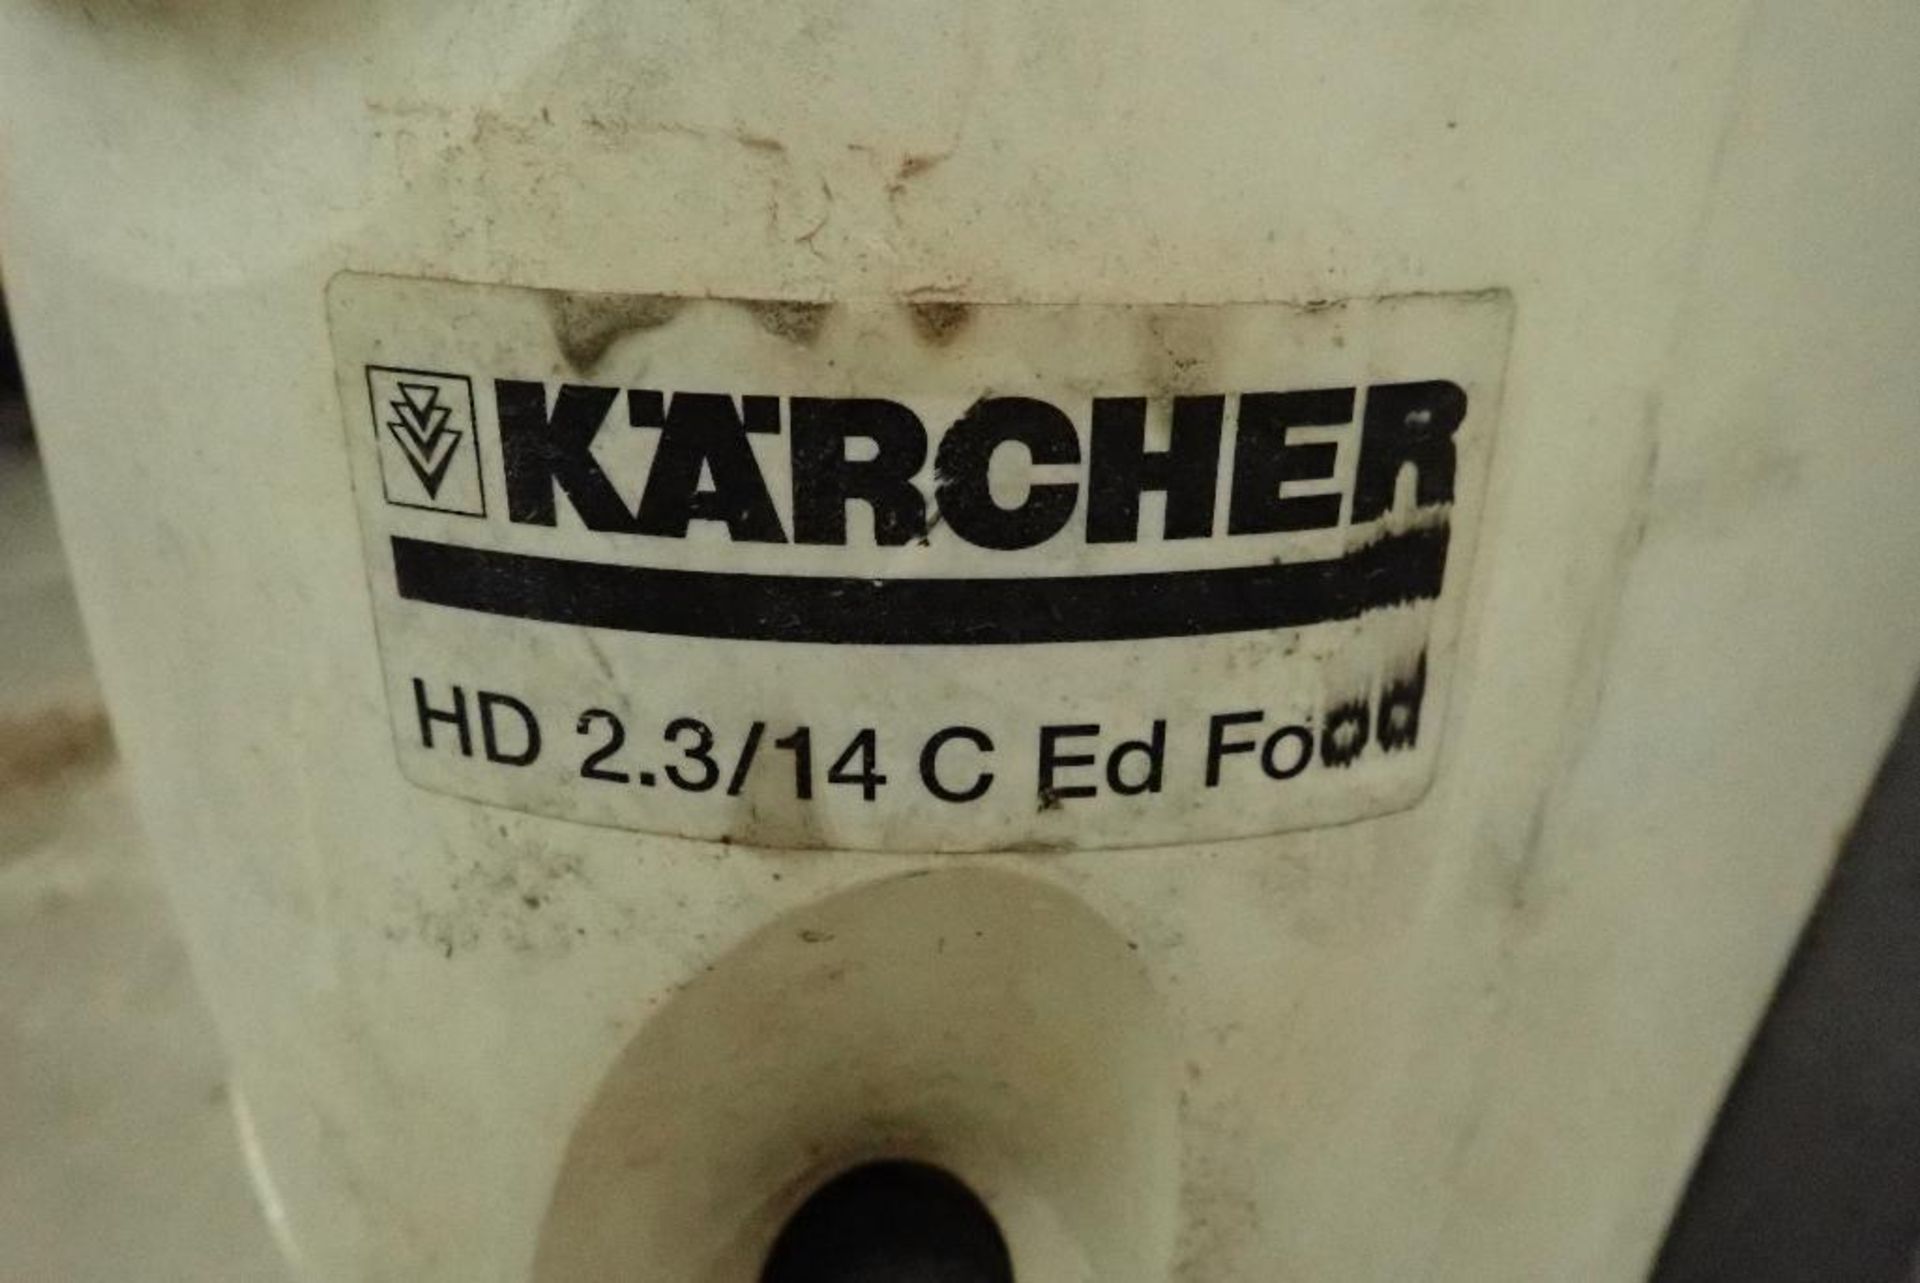 Karcher pressure washer, (2) shop vac. **Rigging Fee: $15** (Located in Delta, BC Canada.) - Image 5 of 7